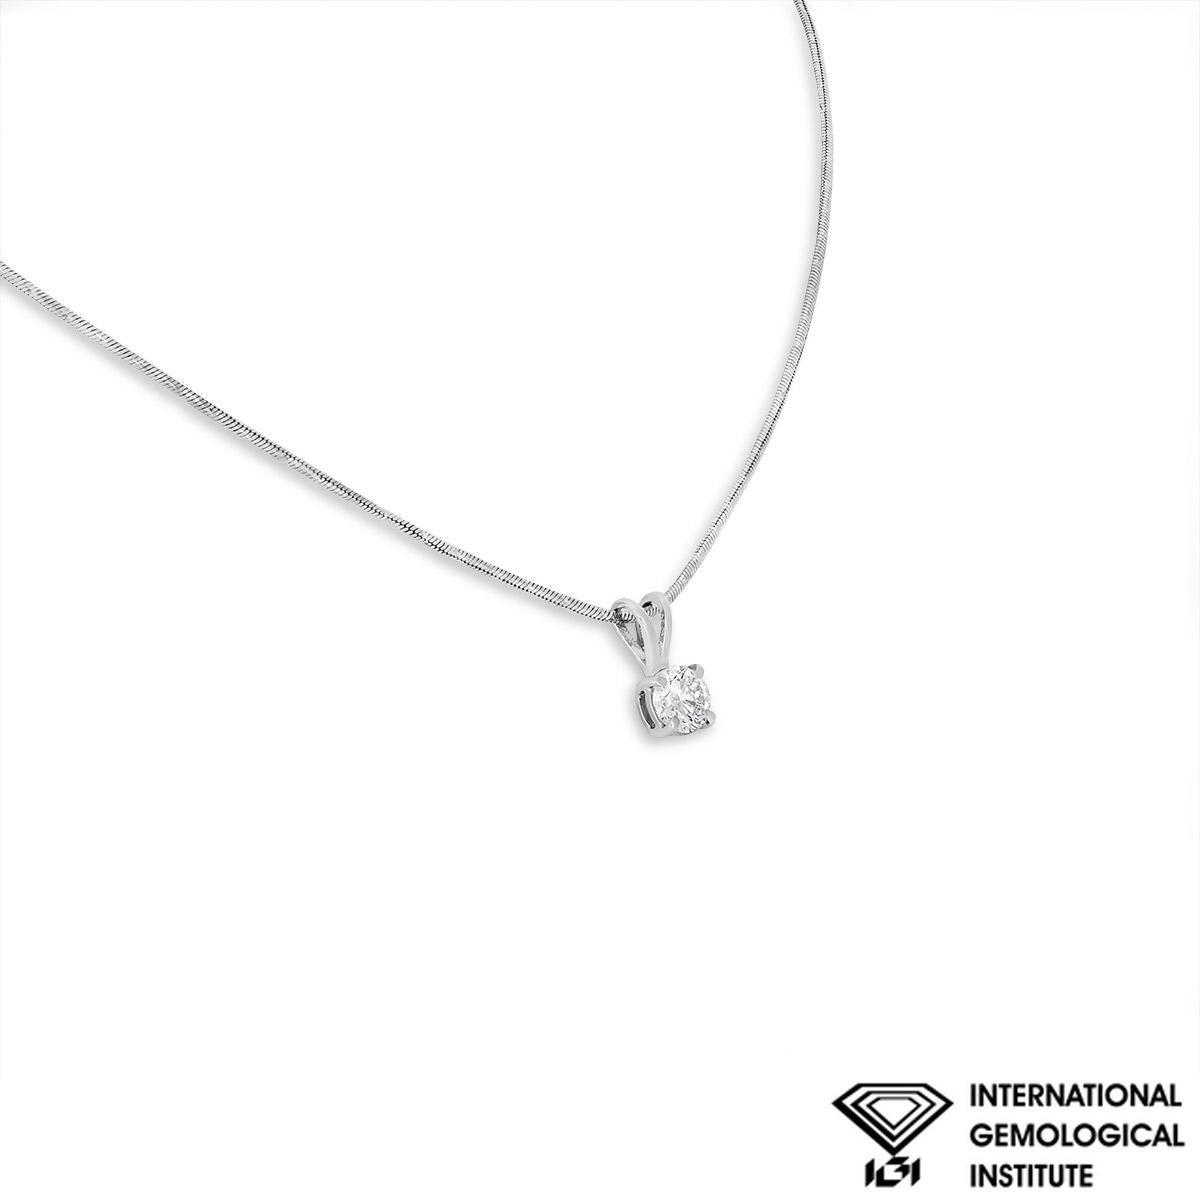 A classic 18k white gold diamond pendant. The pendant features a round brilliant cut diamond set in a four prong mount weighing 0.70ct, E colour and SI1 clarity. The pendant suspends from a textured 15-inch snake chain, finishes with a spring ring